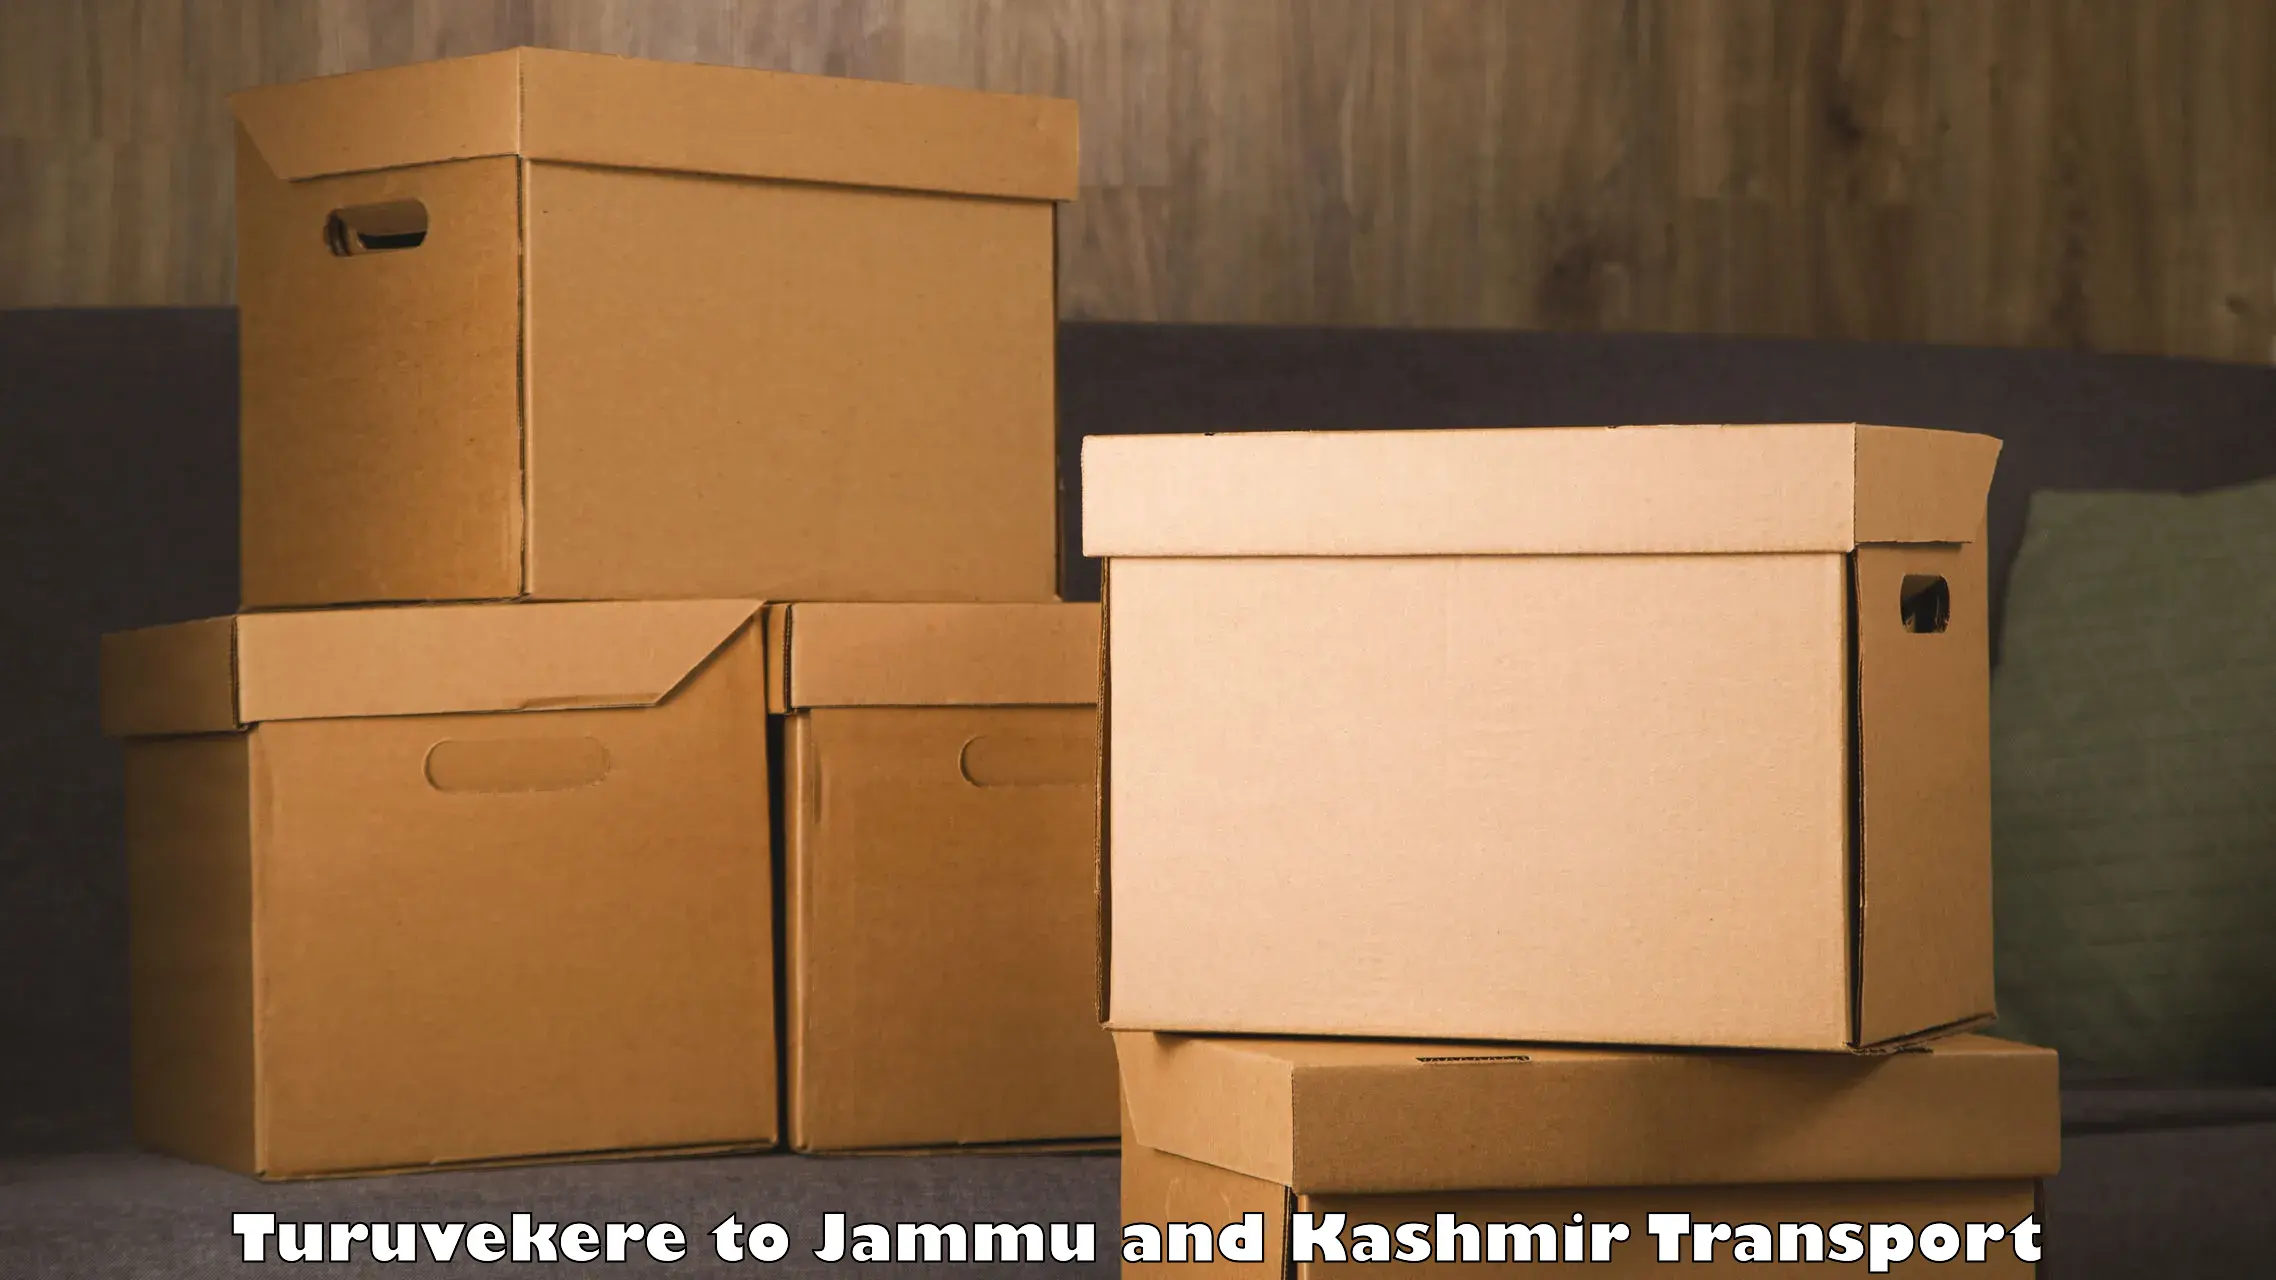 Two wheeler transport services Turuvekere to Jammu and Kashmir